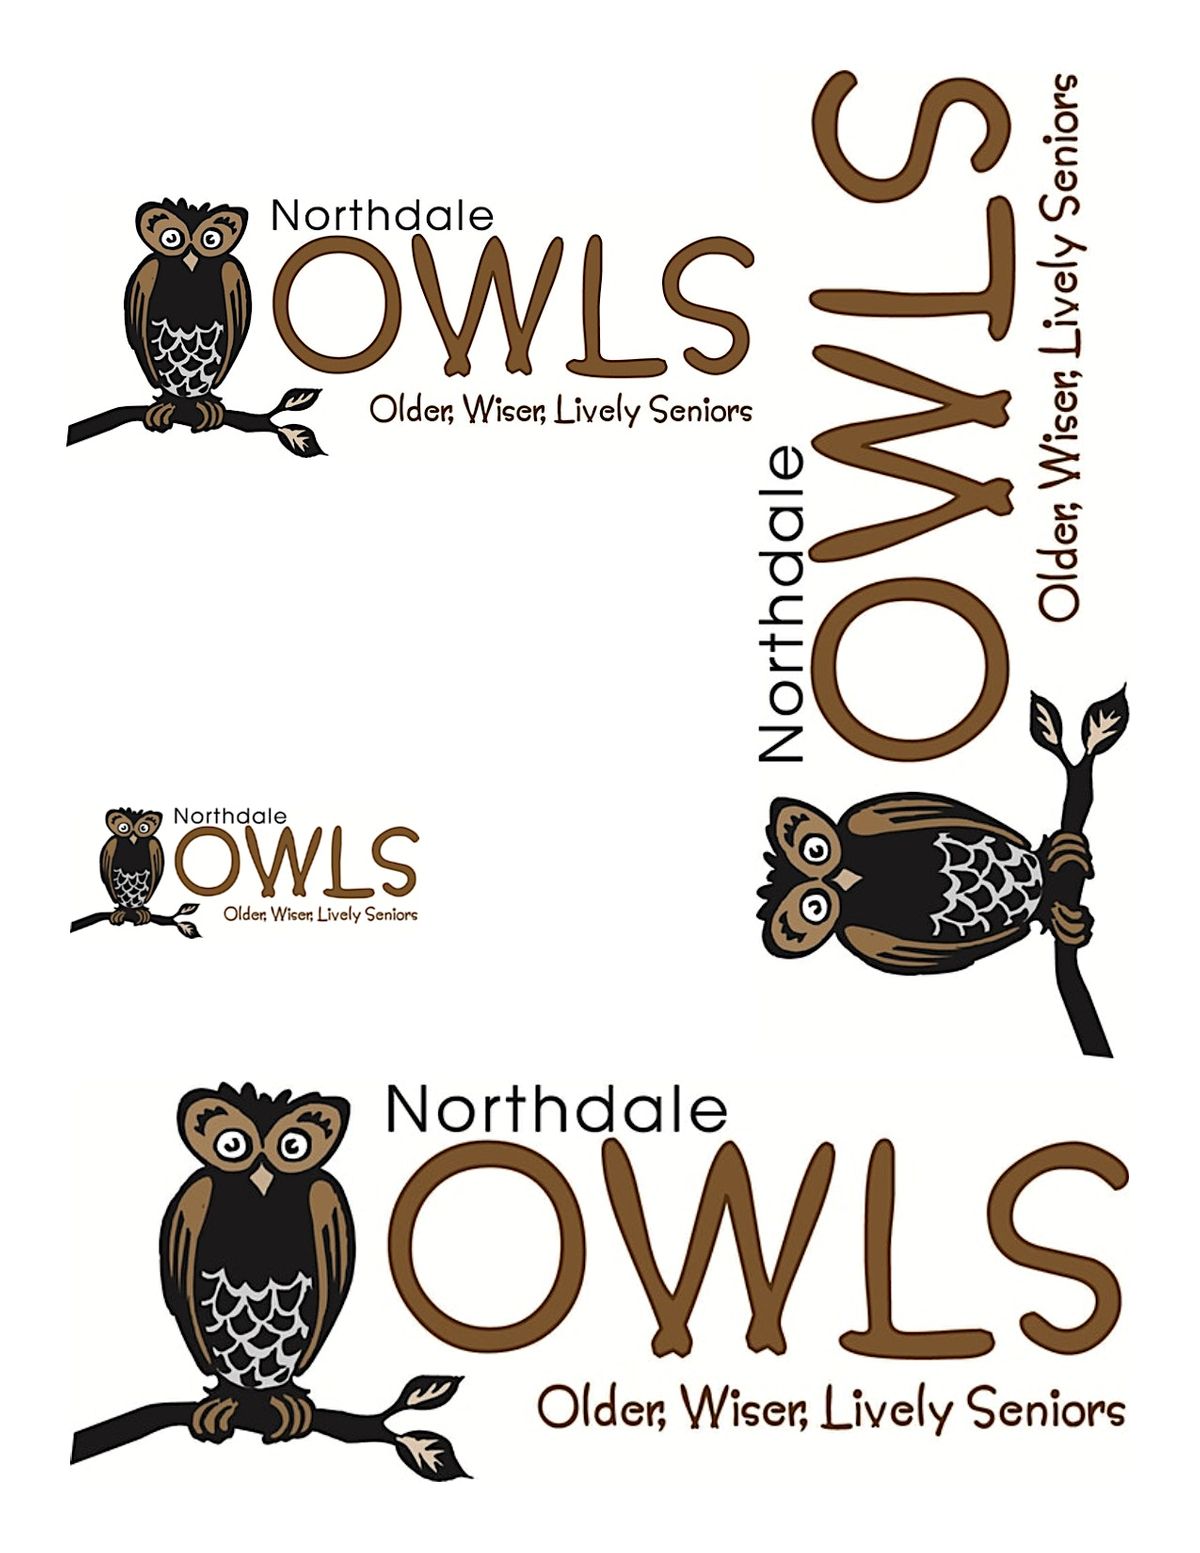 Northdale OWLS Sponsorship Table - Monthly 2022